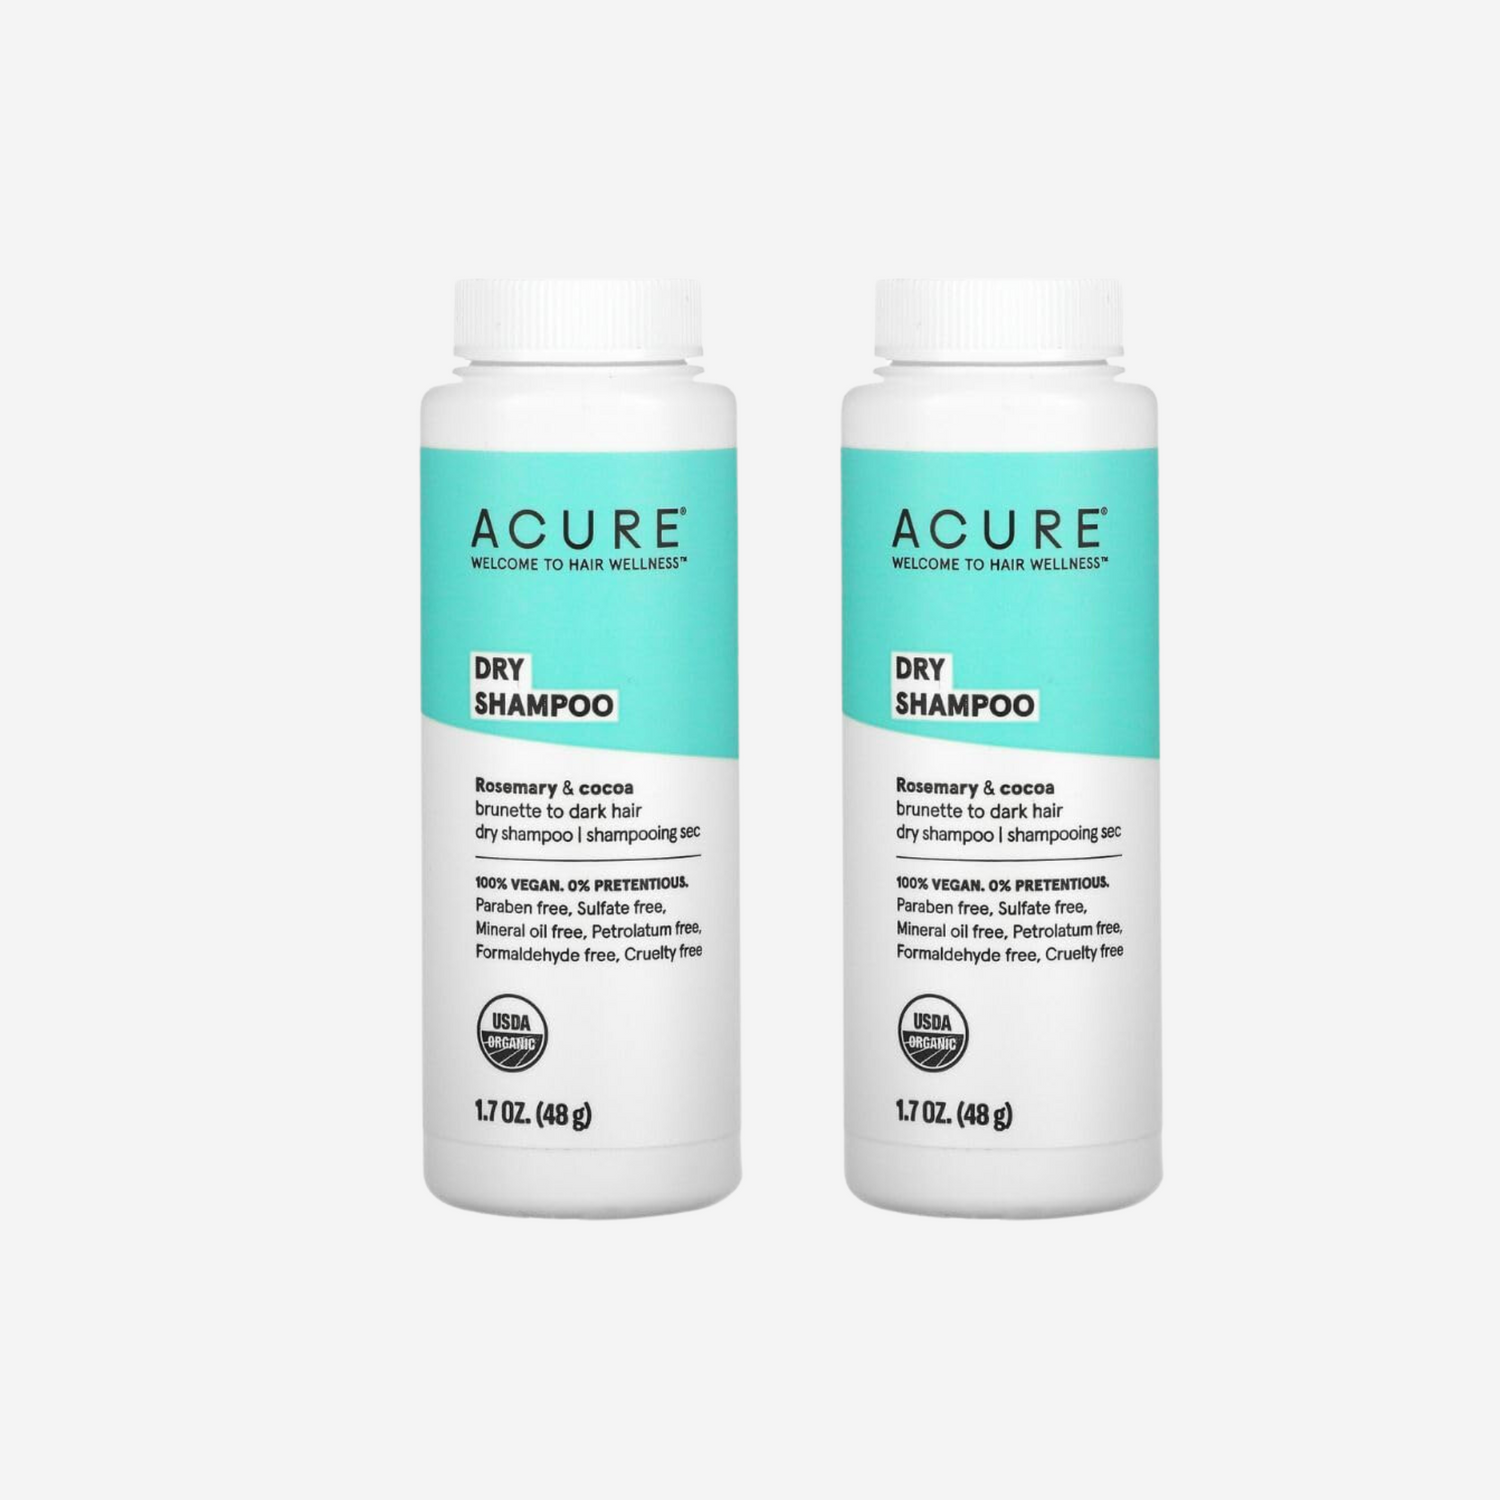 ACURE Dry Shampoo, Brunette to Dark Hair, Rosemary & Cocoa, 1.7 oz (58 g) (Pack of 2)